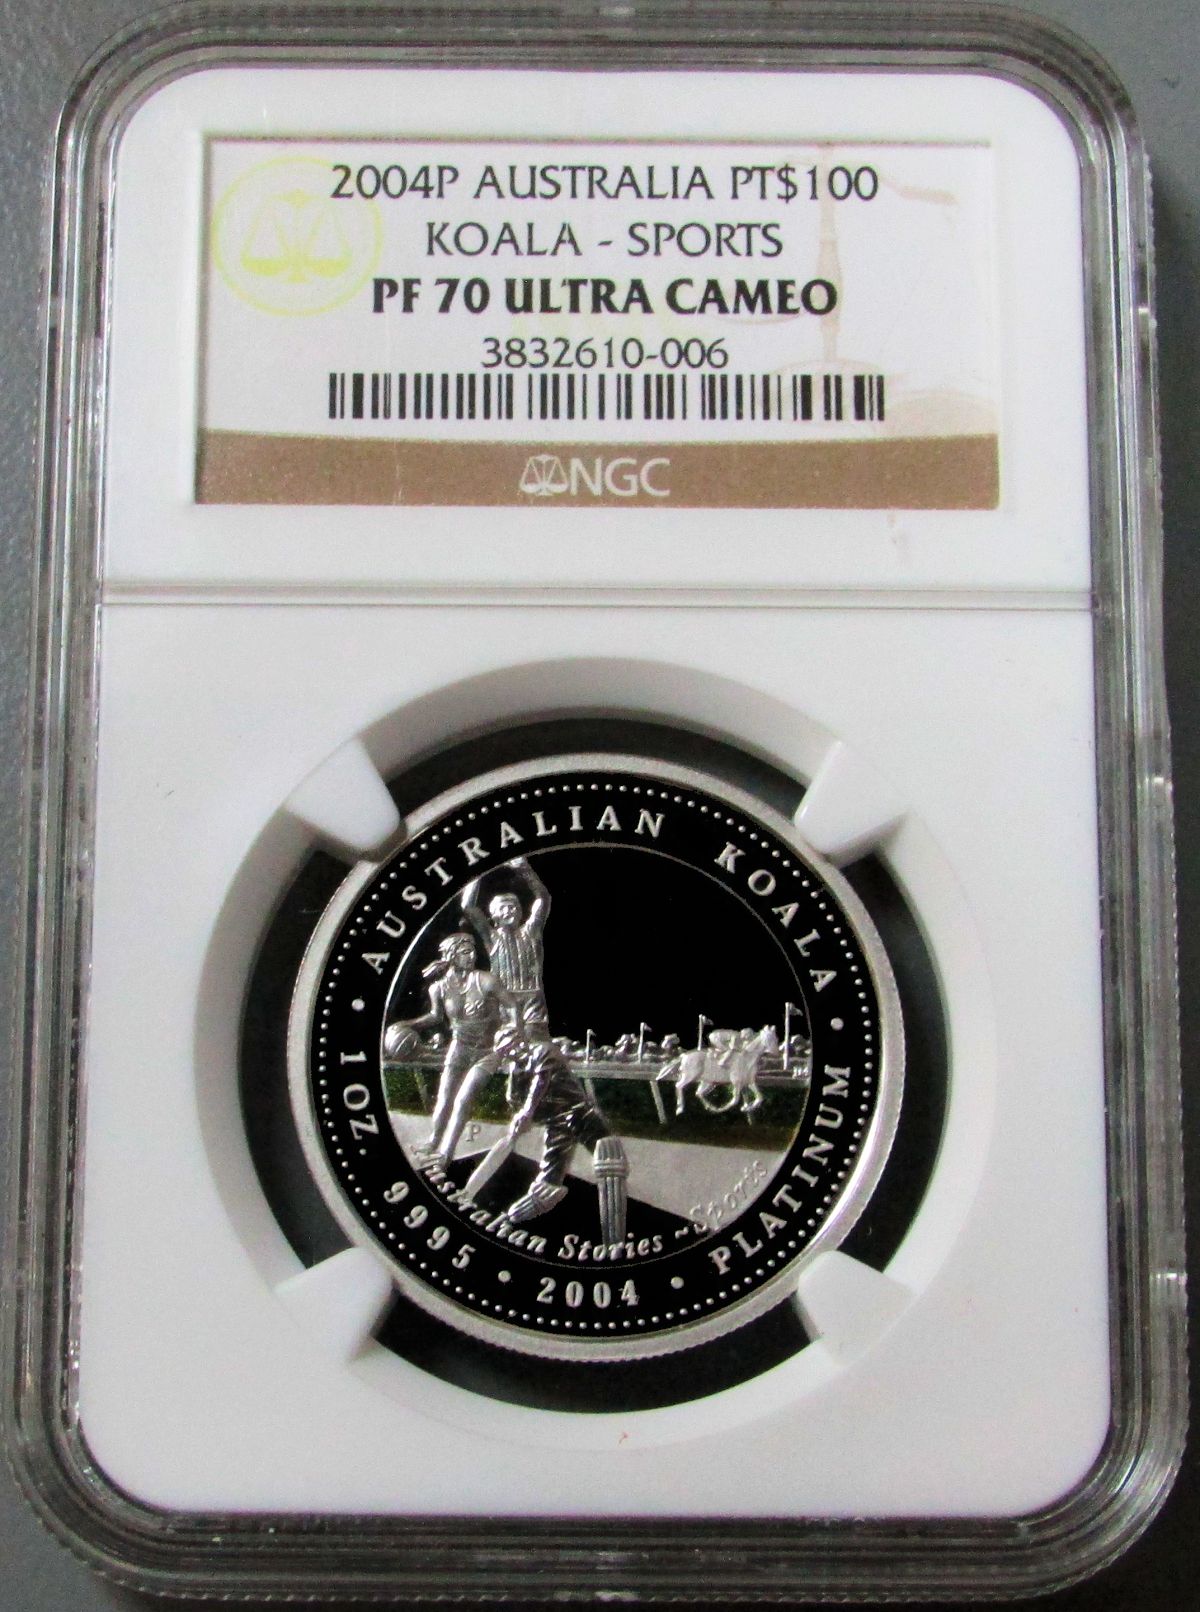 2004 PERTH MINT PLATINUM AUSTRALIA $100 NGC PERFECT PROOF 70 ULTRA CAMEO  "AUSTRALIAN SPORTS" ONLY 109 MINTED 